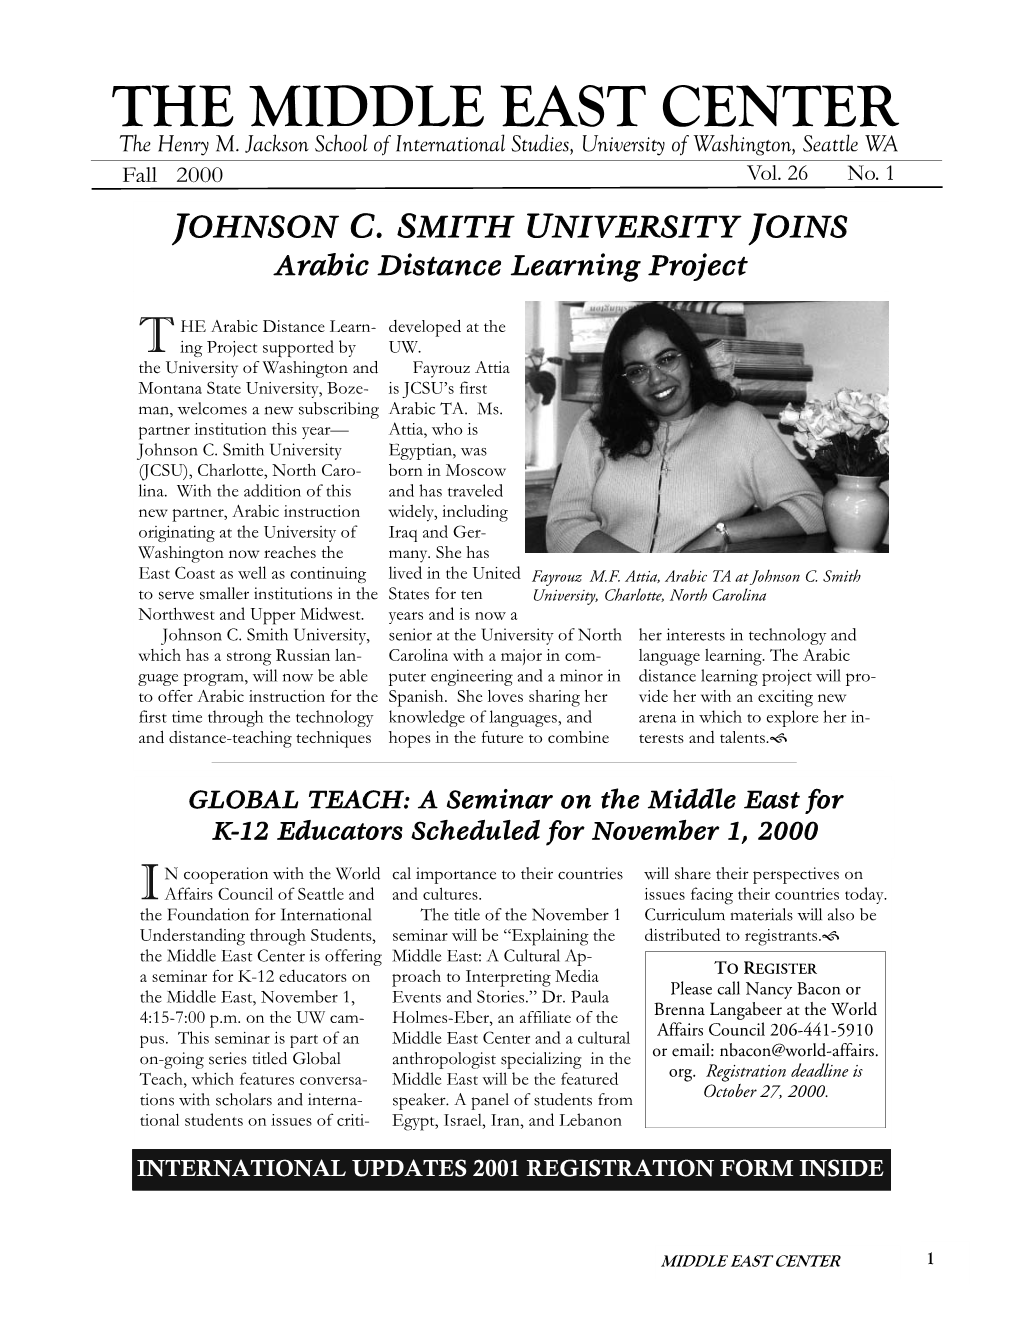 JOHNSON C. SMITH UNIVERSITY JOINS Arabic Distance Learning Project